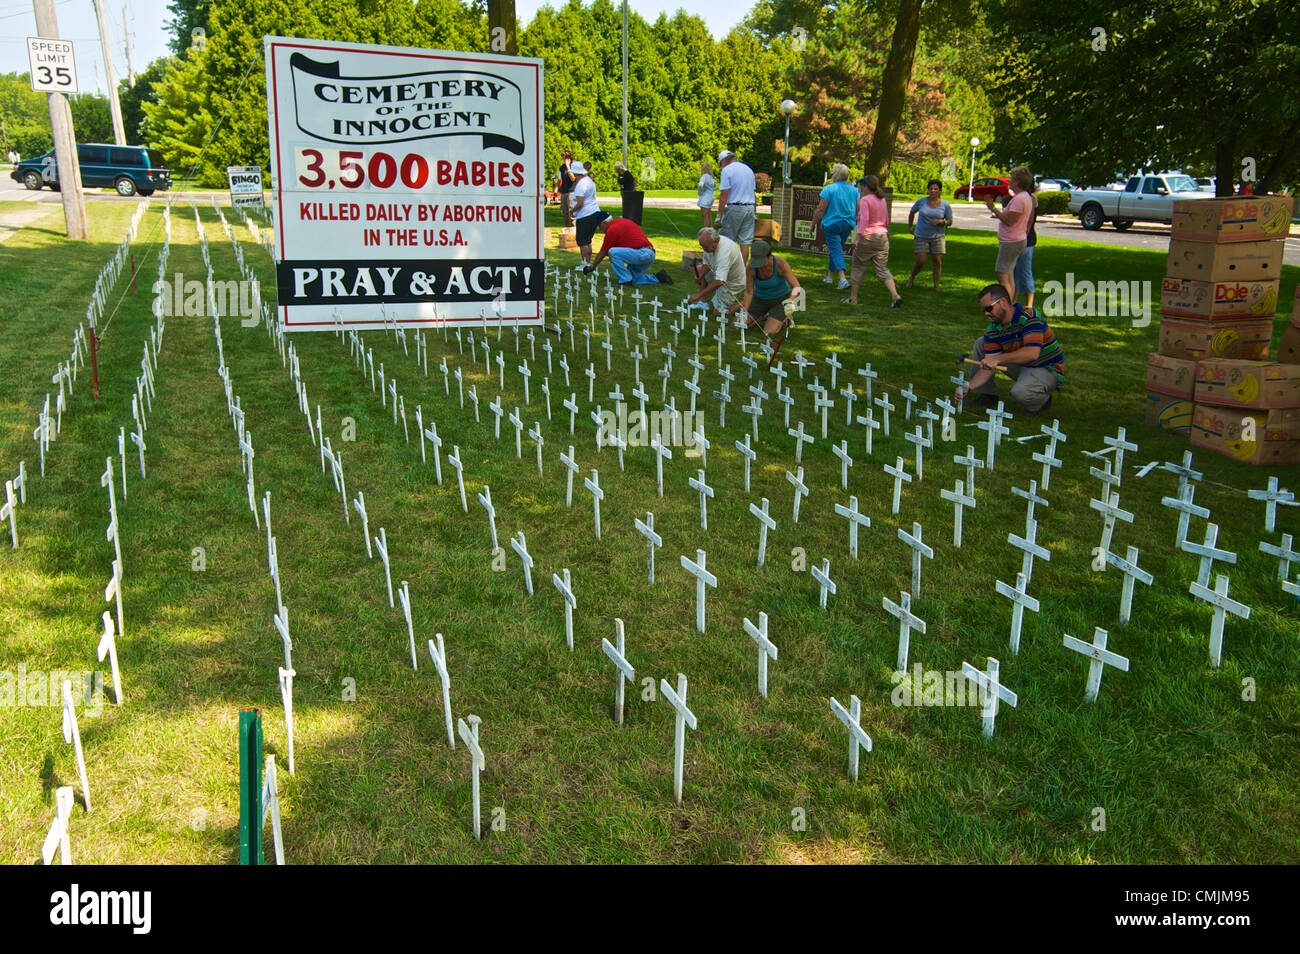 16th Aug 2012. Respect for Life groups from Immaculate Conception Catholic Church of Port Clinton, St. Joseph Catholic Church of Marblehead, and St. Mary's Byzantine Catholic Church of Marblehead Ohio set out 3500 crosses to represent the daily abortion rate in the US Stock Photo